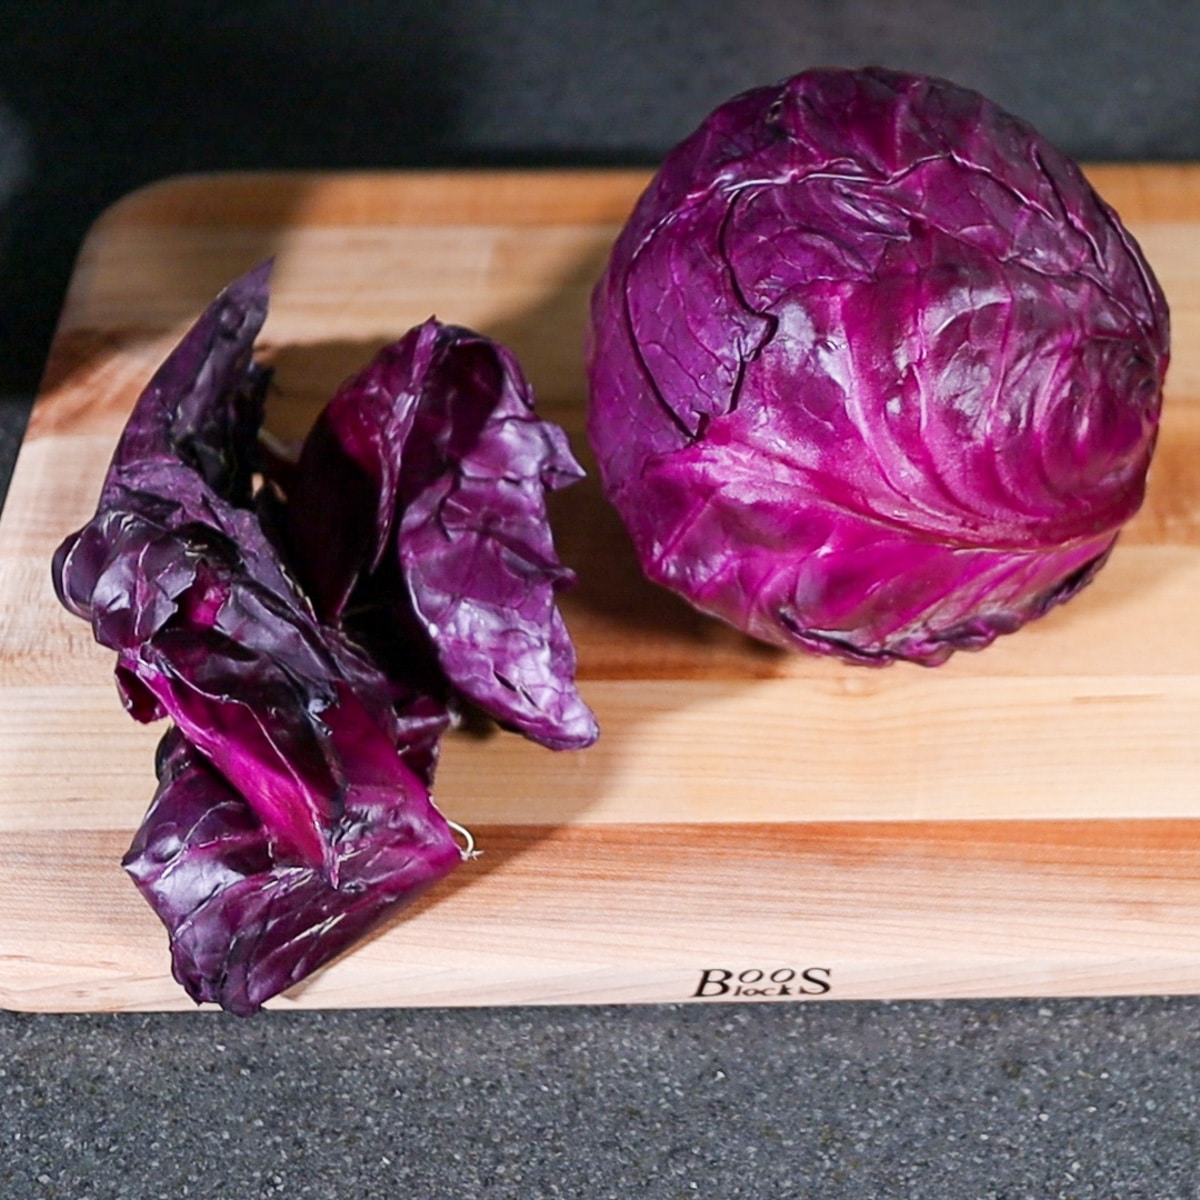 removing the outer layer of a cabbage